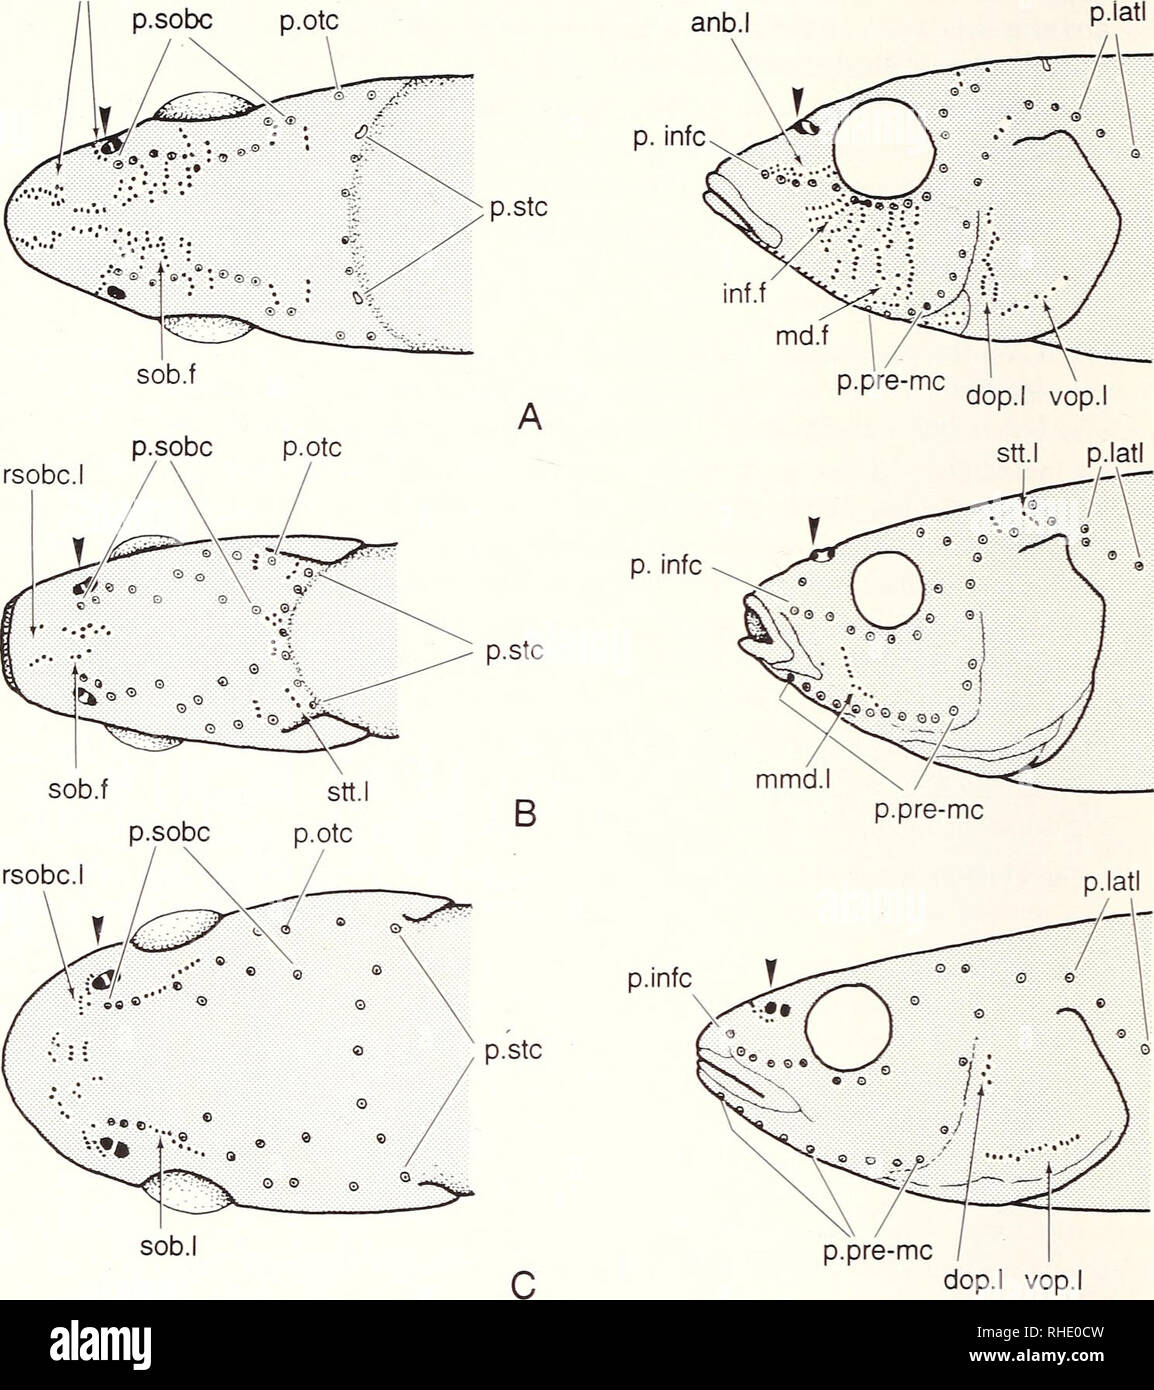 . Bonner zoologische Monographien. Zoology. 80 rinf.l + rsobc.l. Fig.45: Diagram of cyprinid heads showing the distribution of neuromast lines in dorsal (left) and late- ral (right) views of (A) Cyprinus carpio. (B) Carassius aiiratus. and (C) Leuciscus hakuensis (slightly modified from Sato 1955). Arro heads point to nostrils. anb.l: antorbital line: dop.l: dorsal opercular Ime; inf.f: infraorbital field of neuromasts: md.f: mandi- bular field of neuromasts: mmd.l: median mandibular line: p.into: pores of infraorbital canal: p. latl: pores of main lateral line: p.otc: pores of otic canal: p Stock Photo